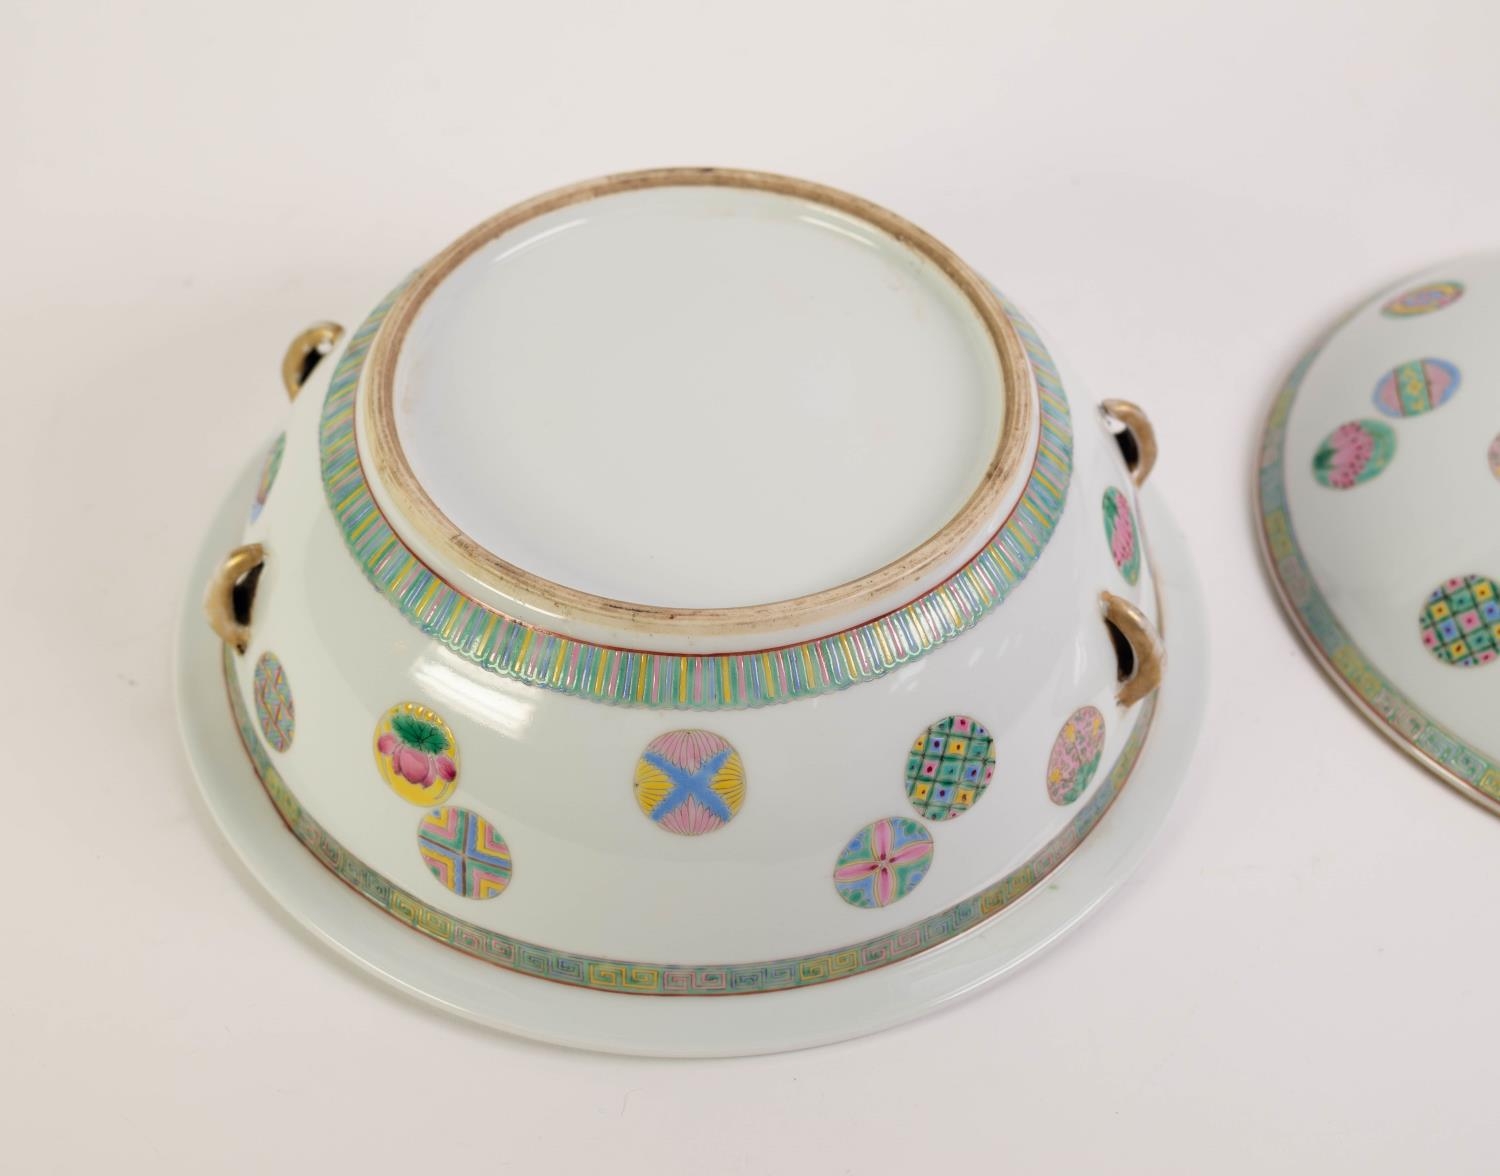 MODERN CHINESE ENAMELLED PORCELAIN SERVING DISH AND COVER, of typical form with small, gilt elephant - Image 4 of 4